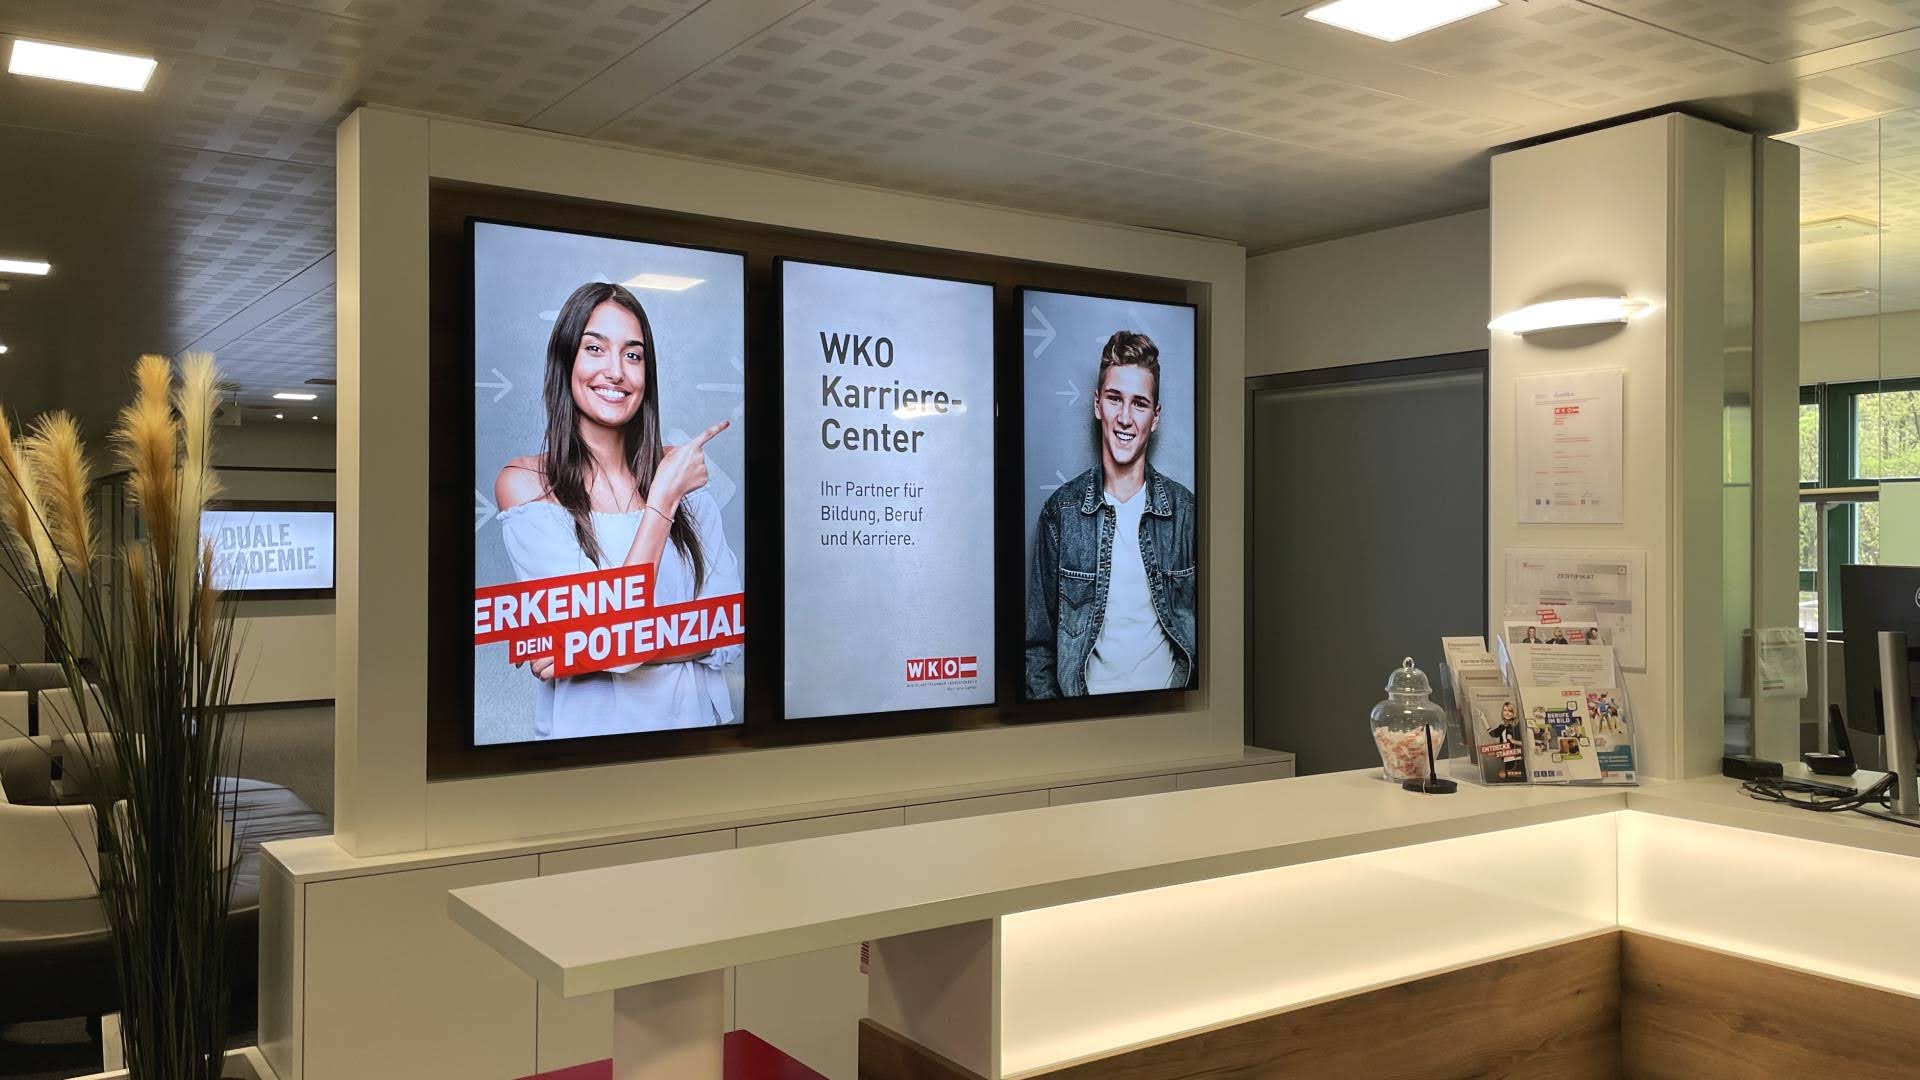 Digital signage for recruiting